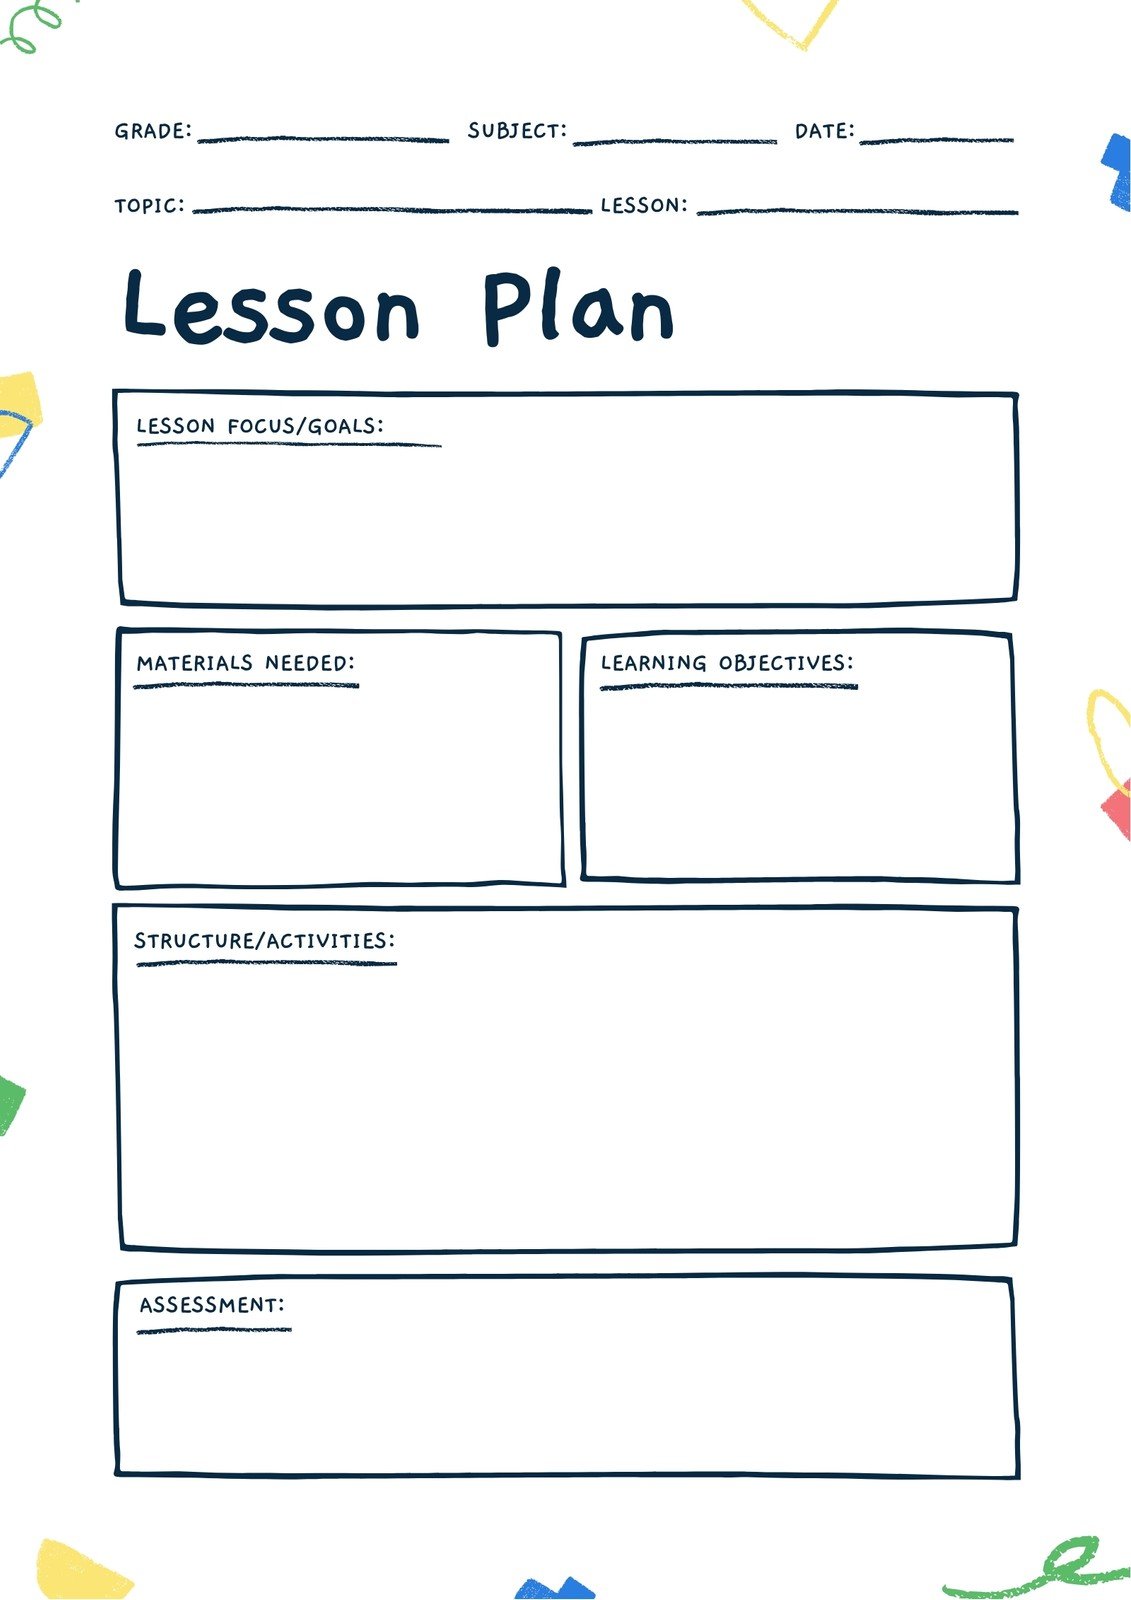 Lesson plan templates you can customize for free  Canva Regarding Blank Unit Lesson Plan Template